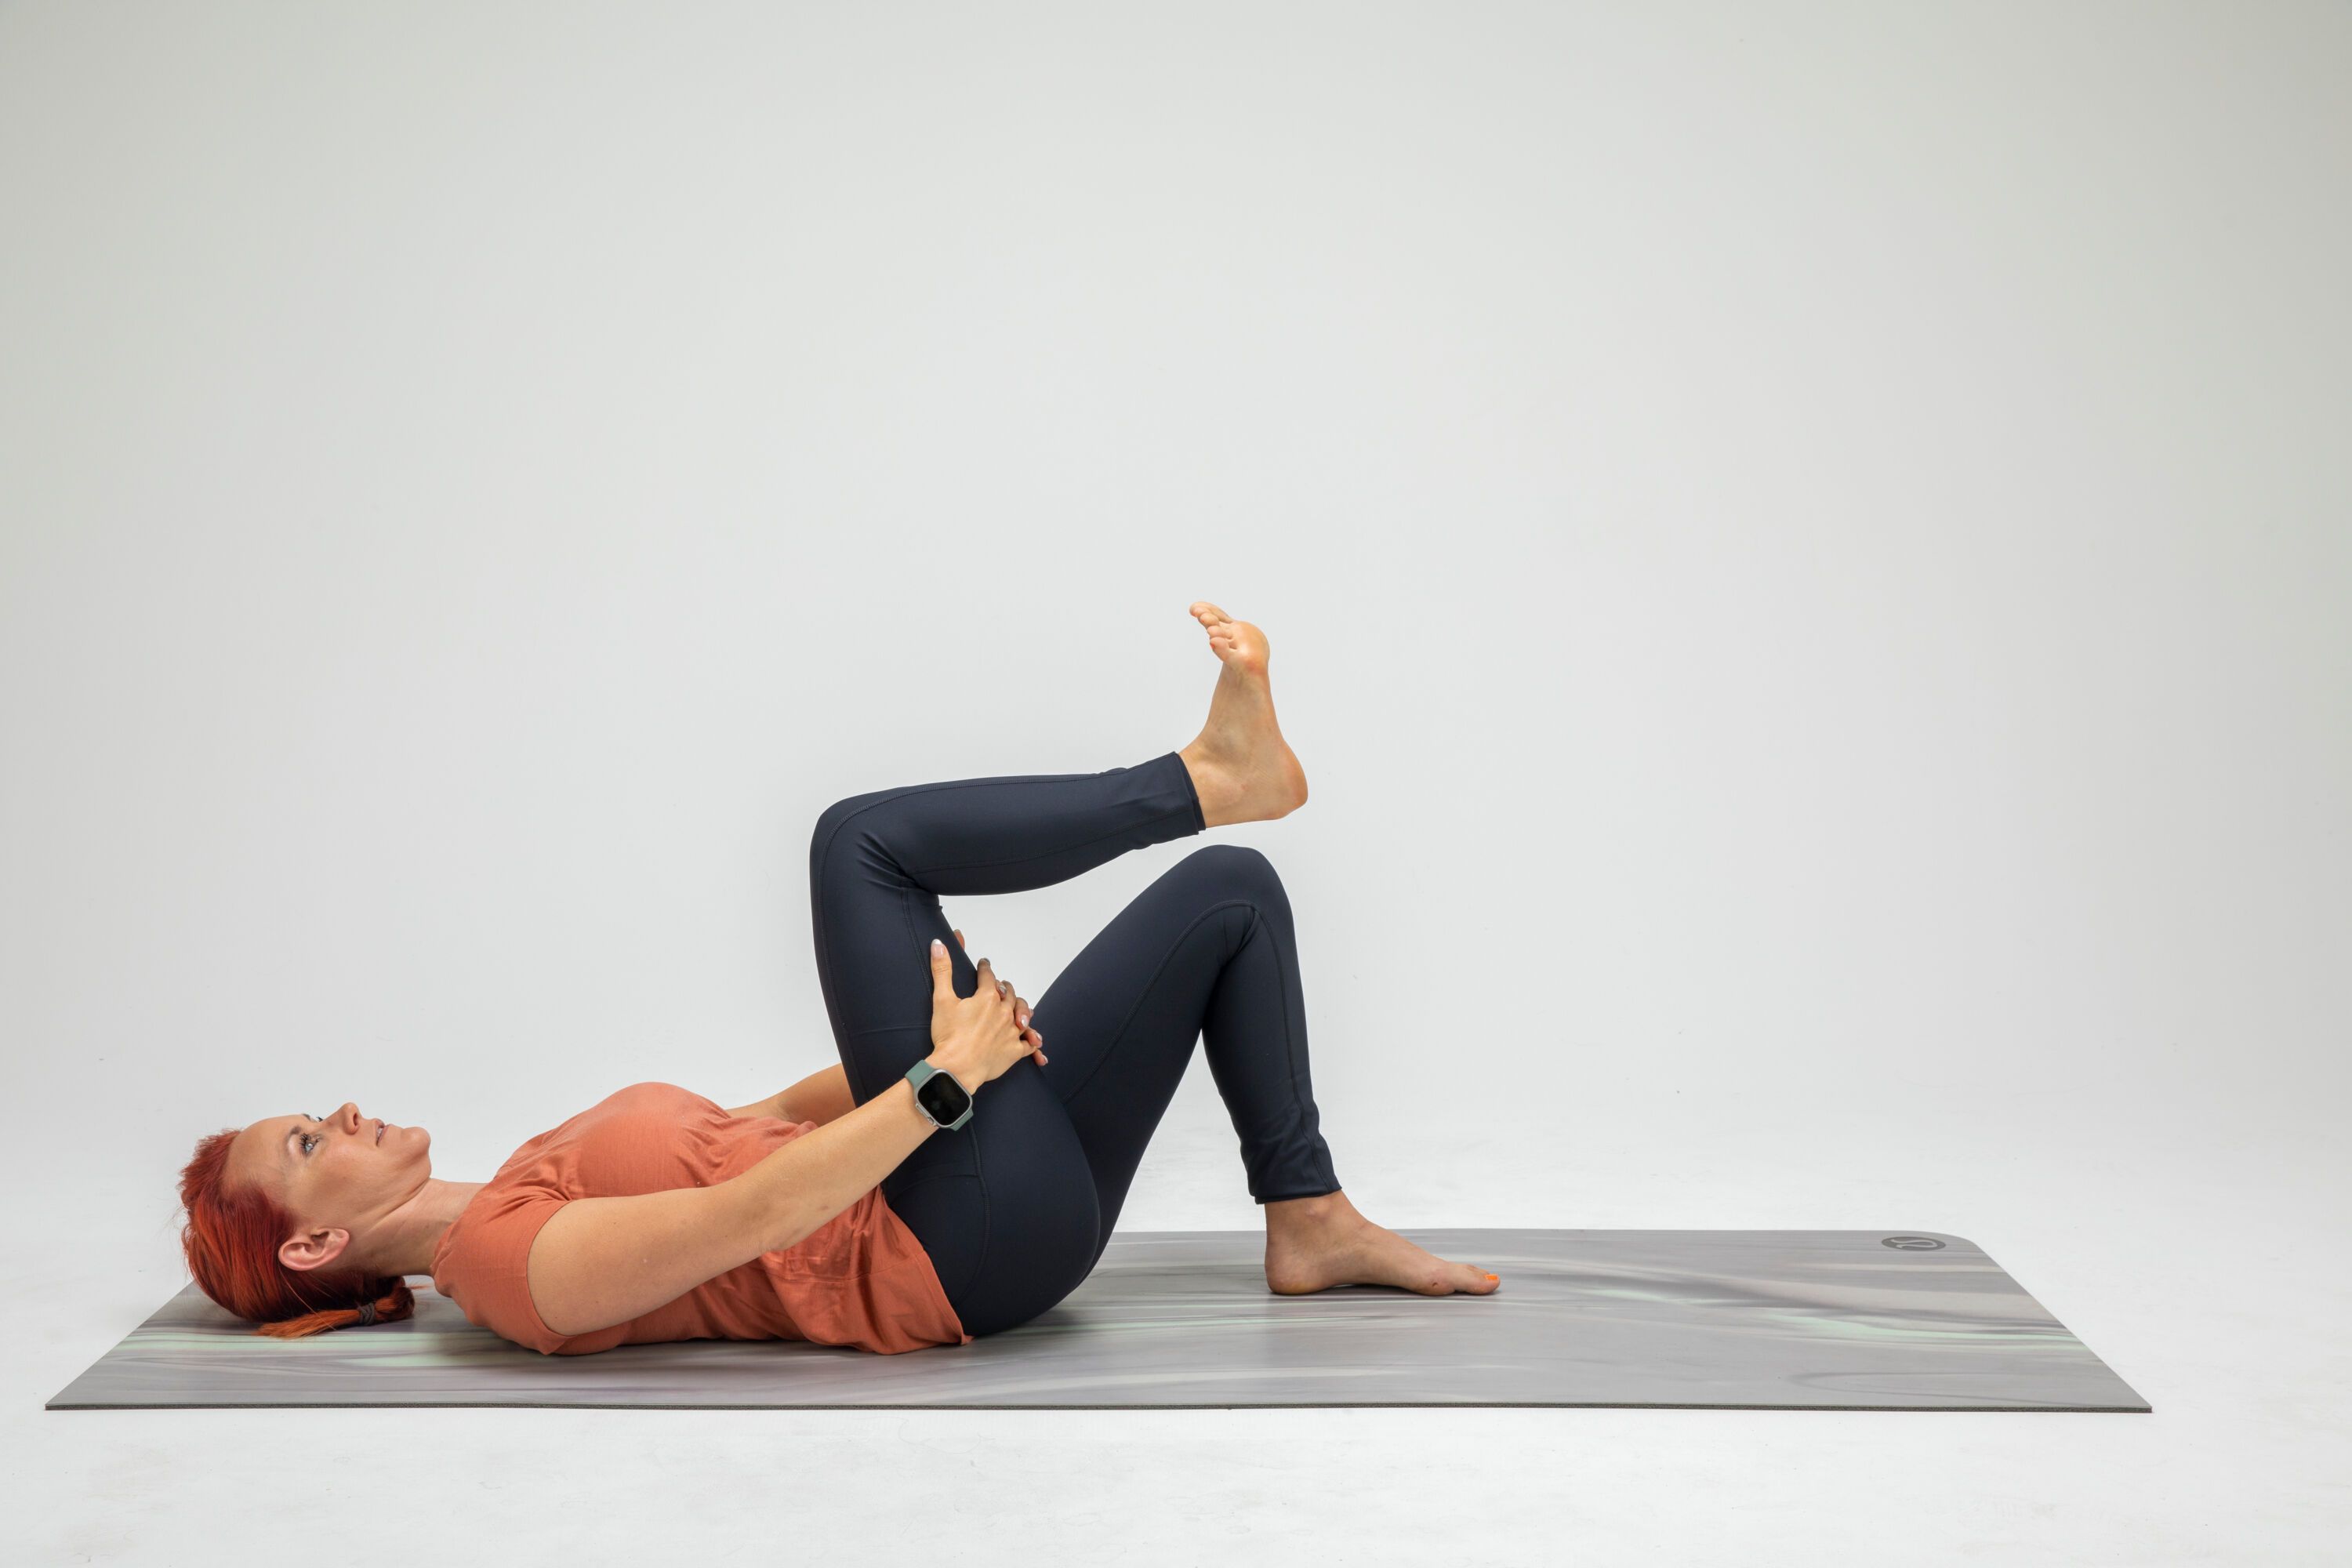 9 Yoga poses for relief from sciatica pain | Yoga for sciatica pain relief  - The Art of Living